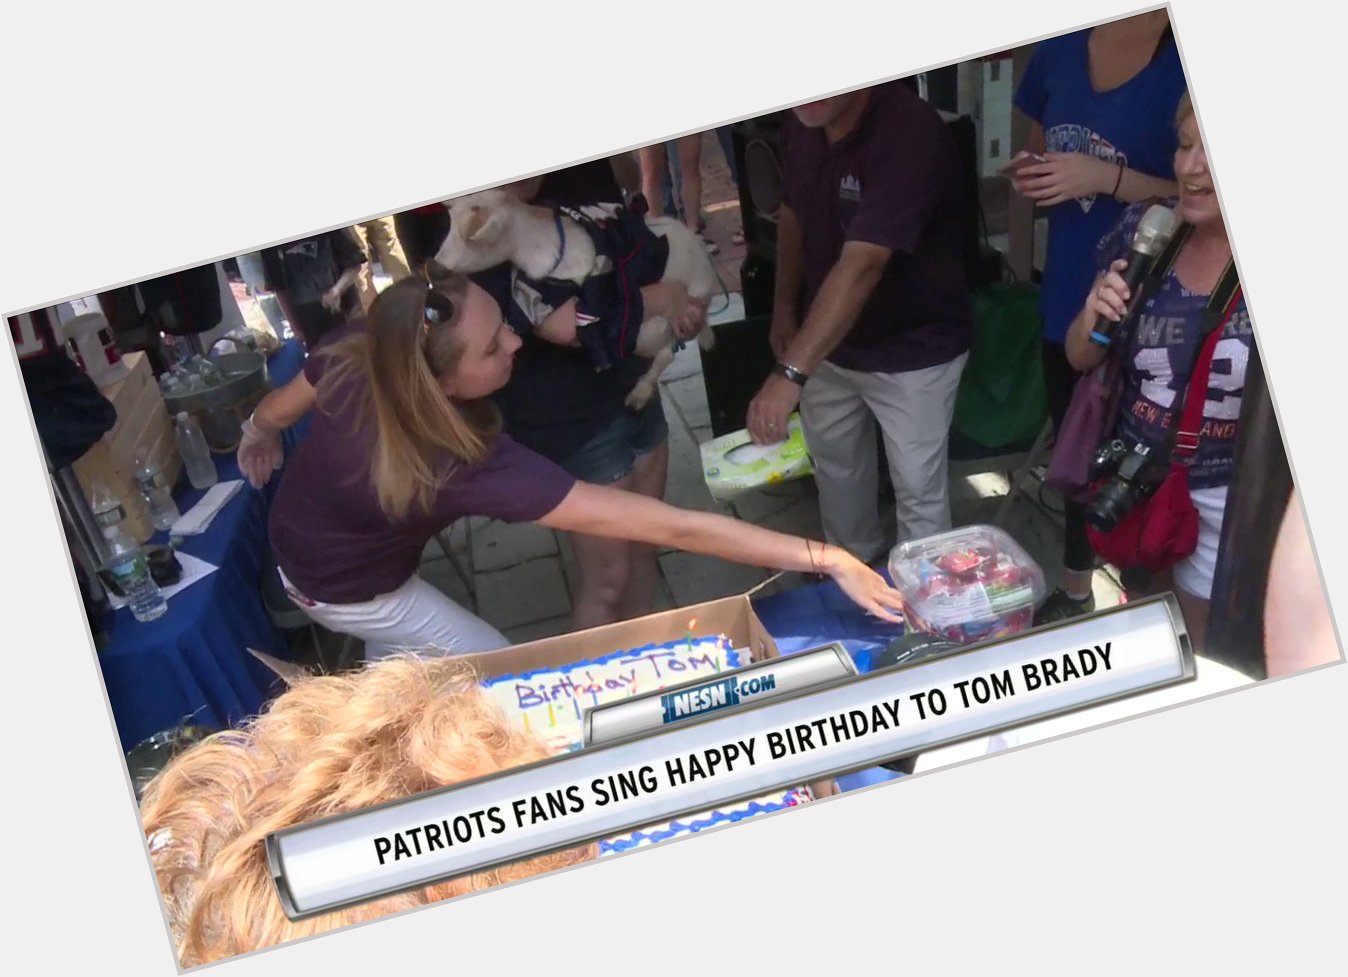 It was a festive atmosphere at Faneuil Hall as Patriots fans sang \"Happy Birthday\" to Tom Brady. 